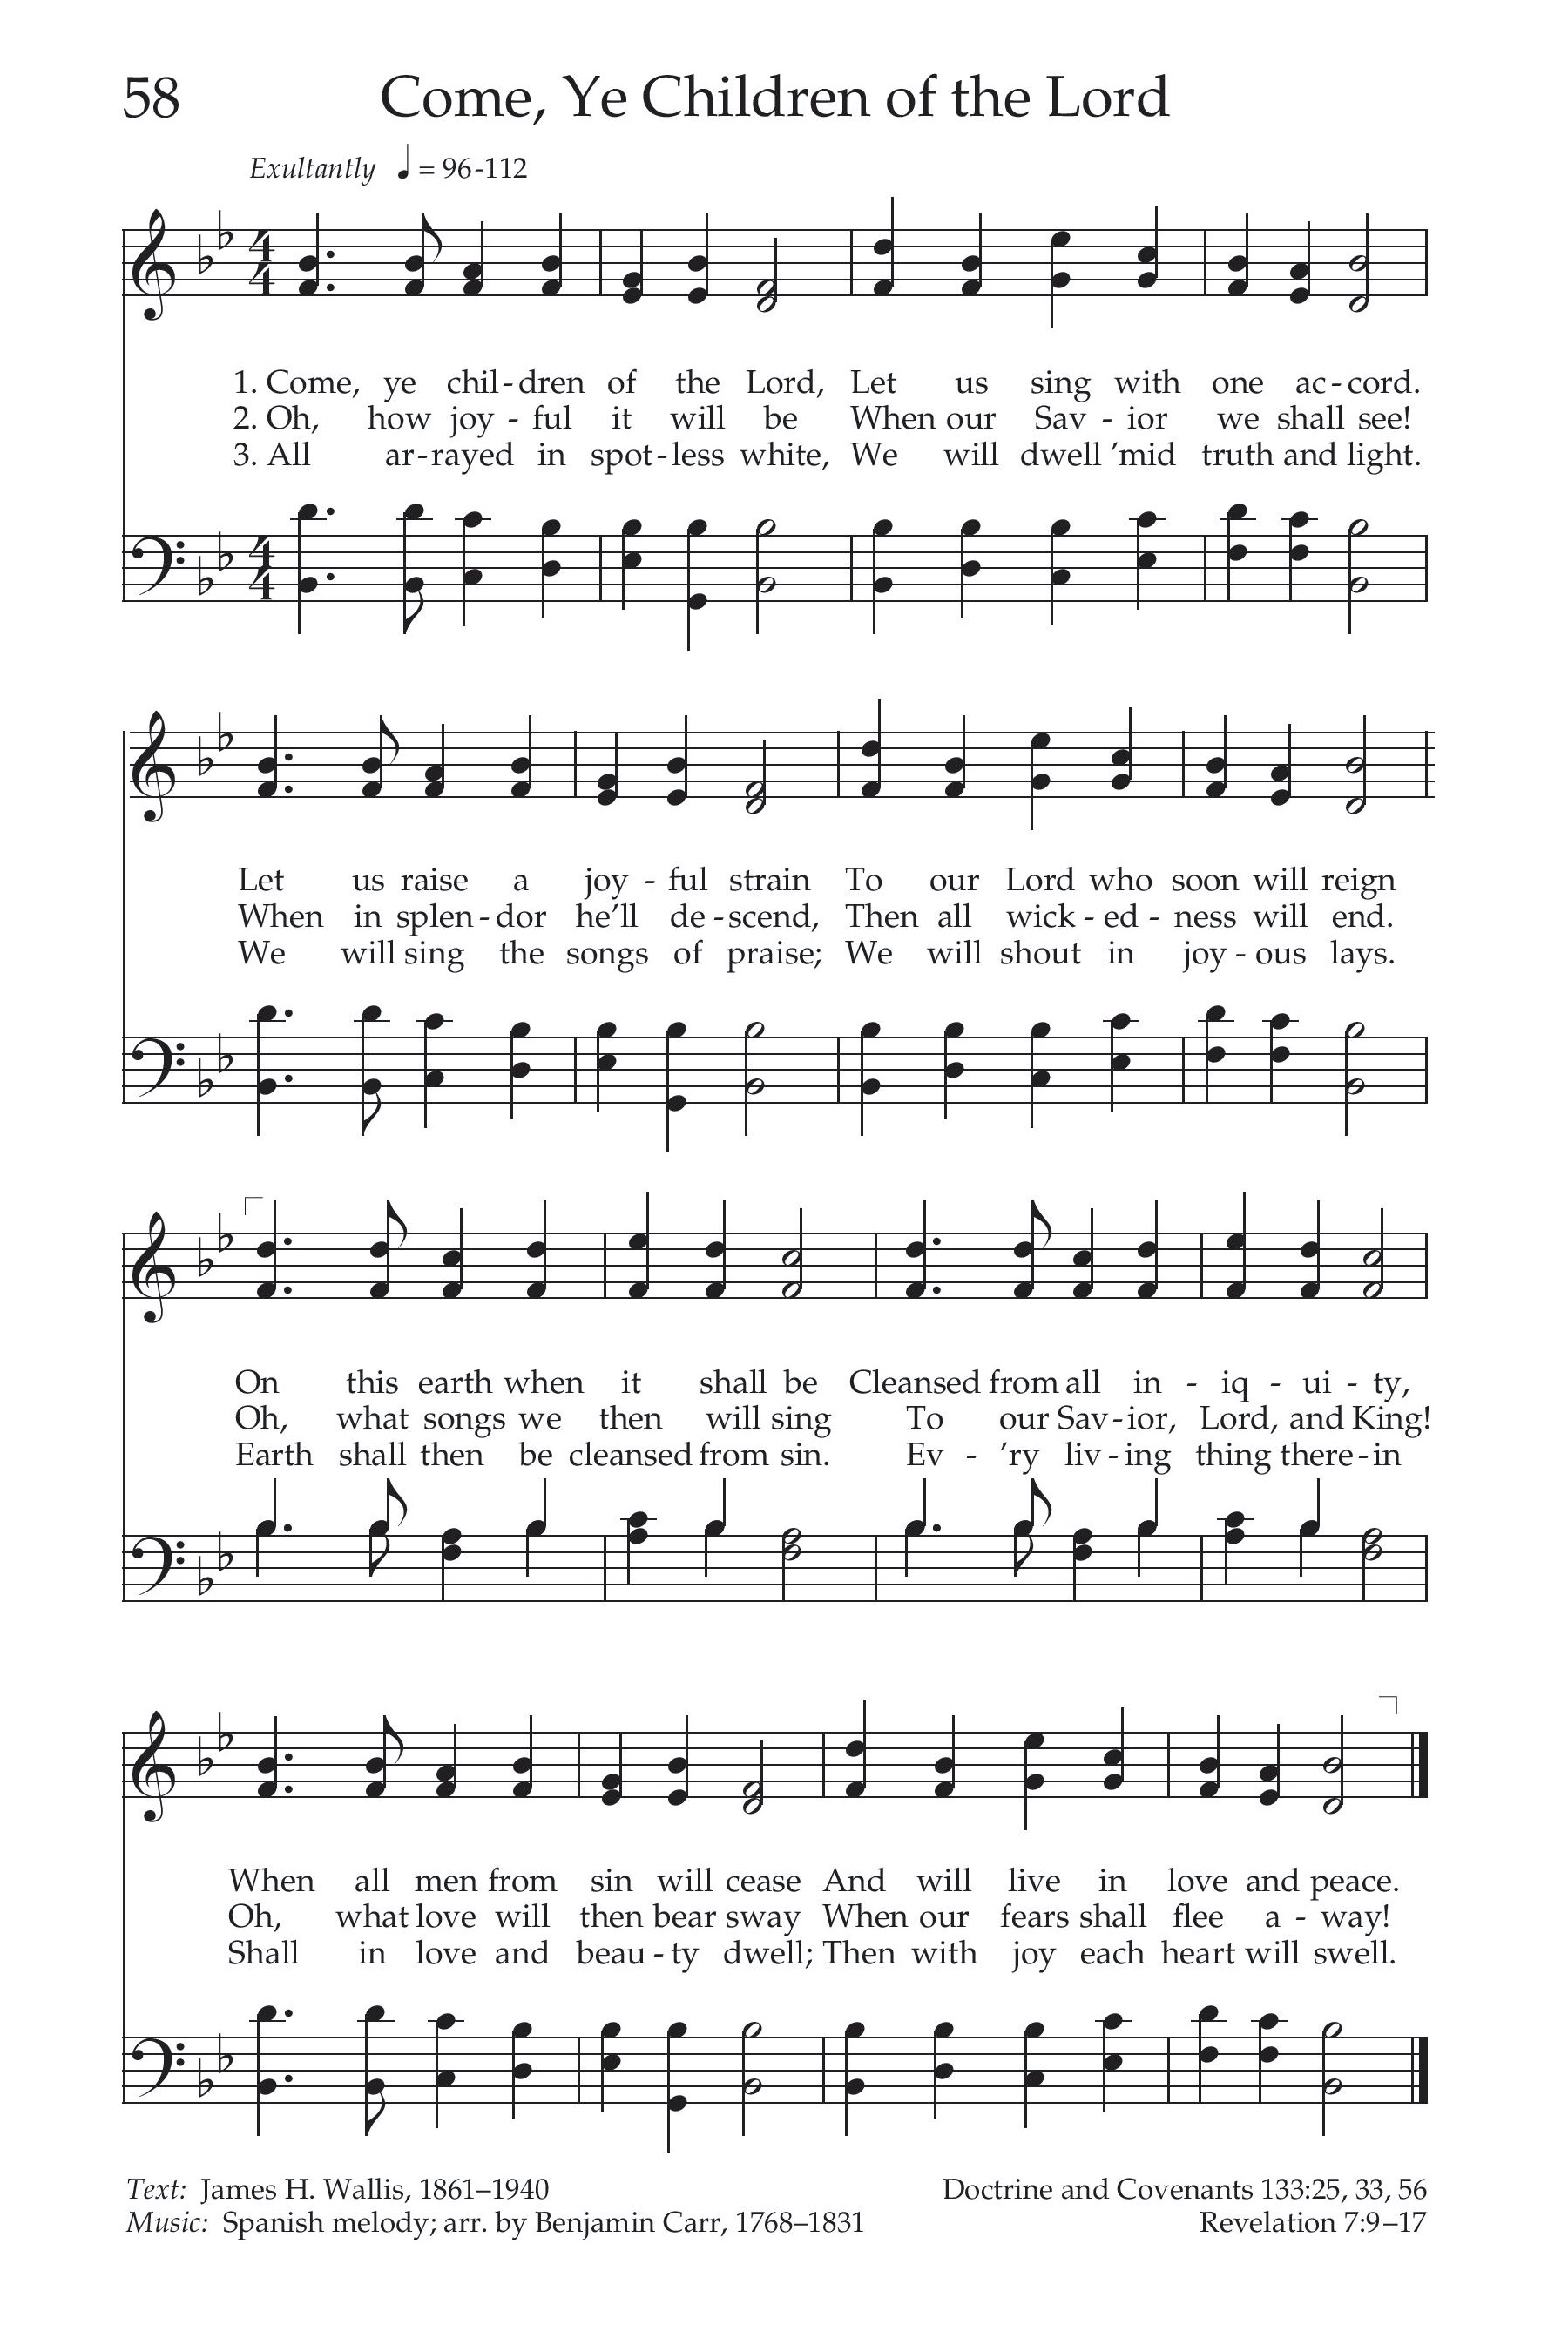 Monday's Hymn of the day: ELW 781 Children of the Heavenly Father, By St.  John's Lutheran Church, Bloomington, Illinois